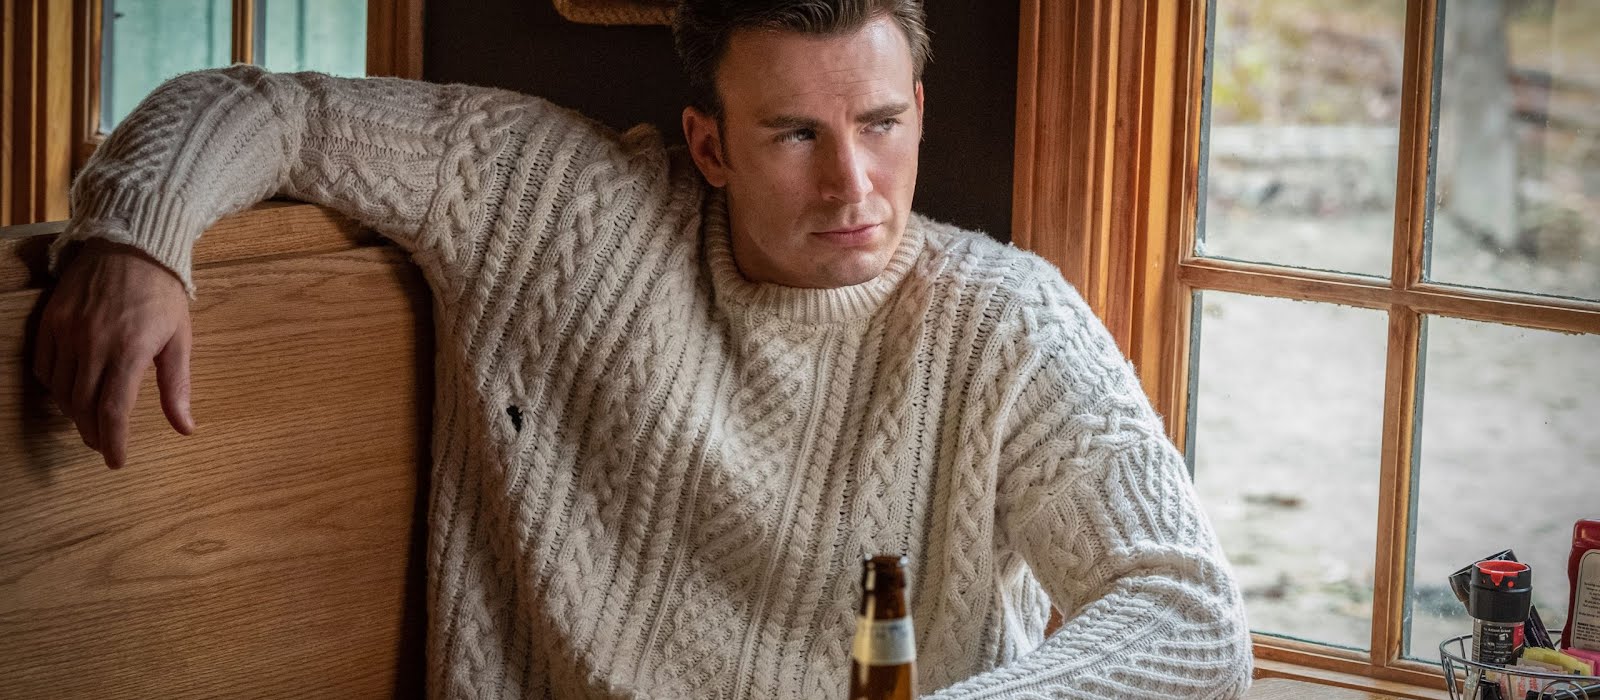 Make like Chris Evans and Taylor Swift and invest in an Aran jumper this season